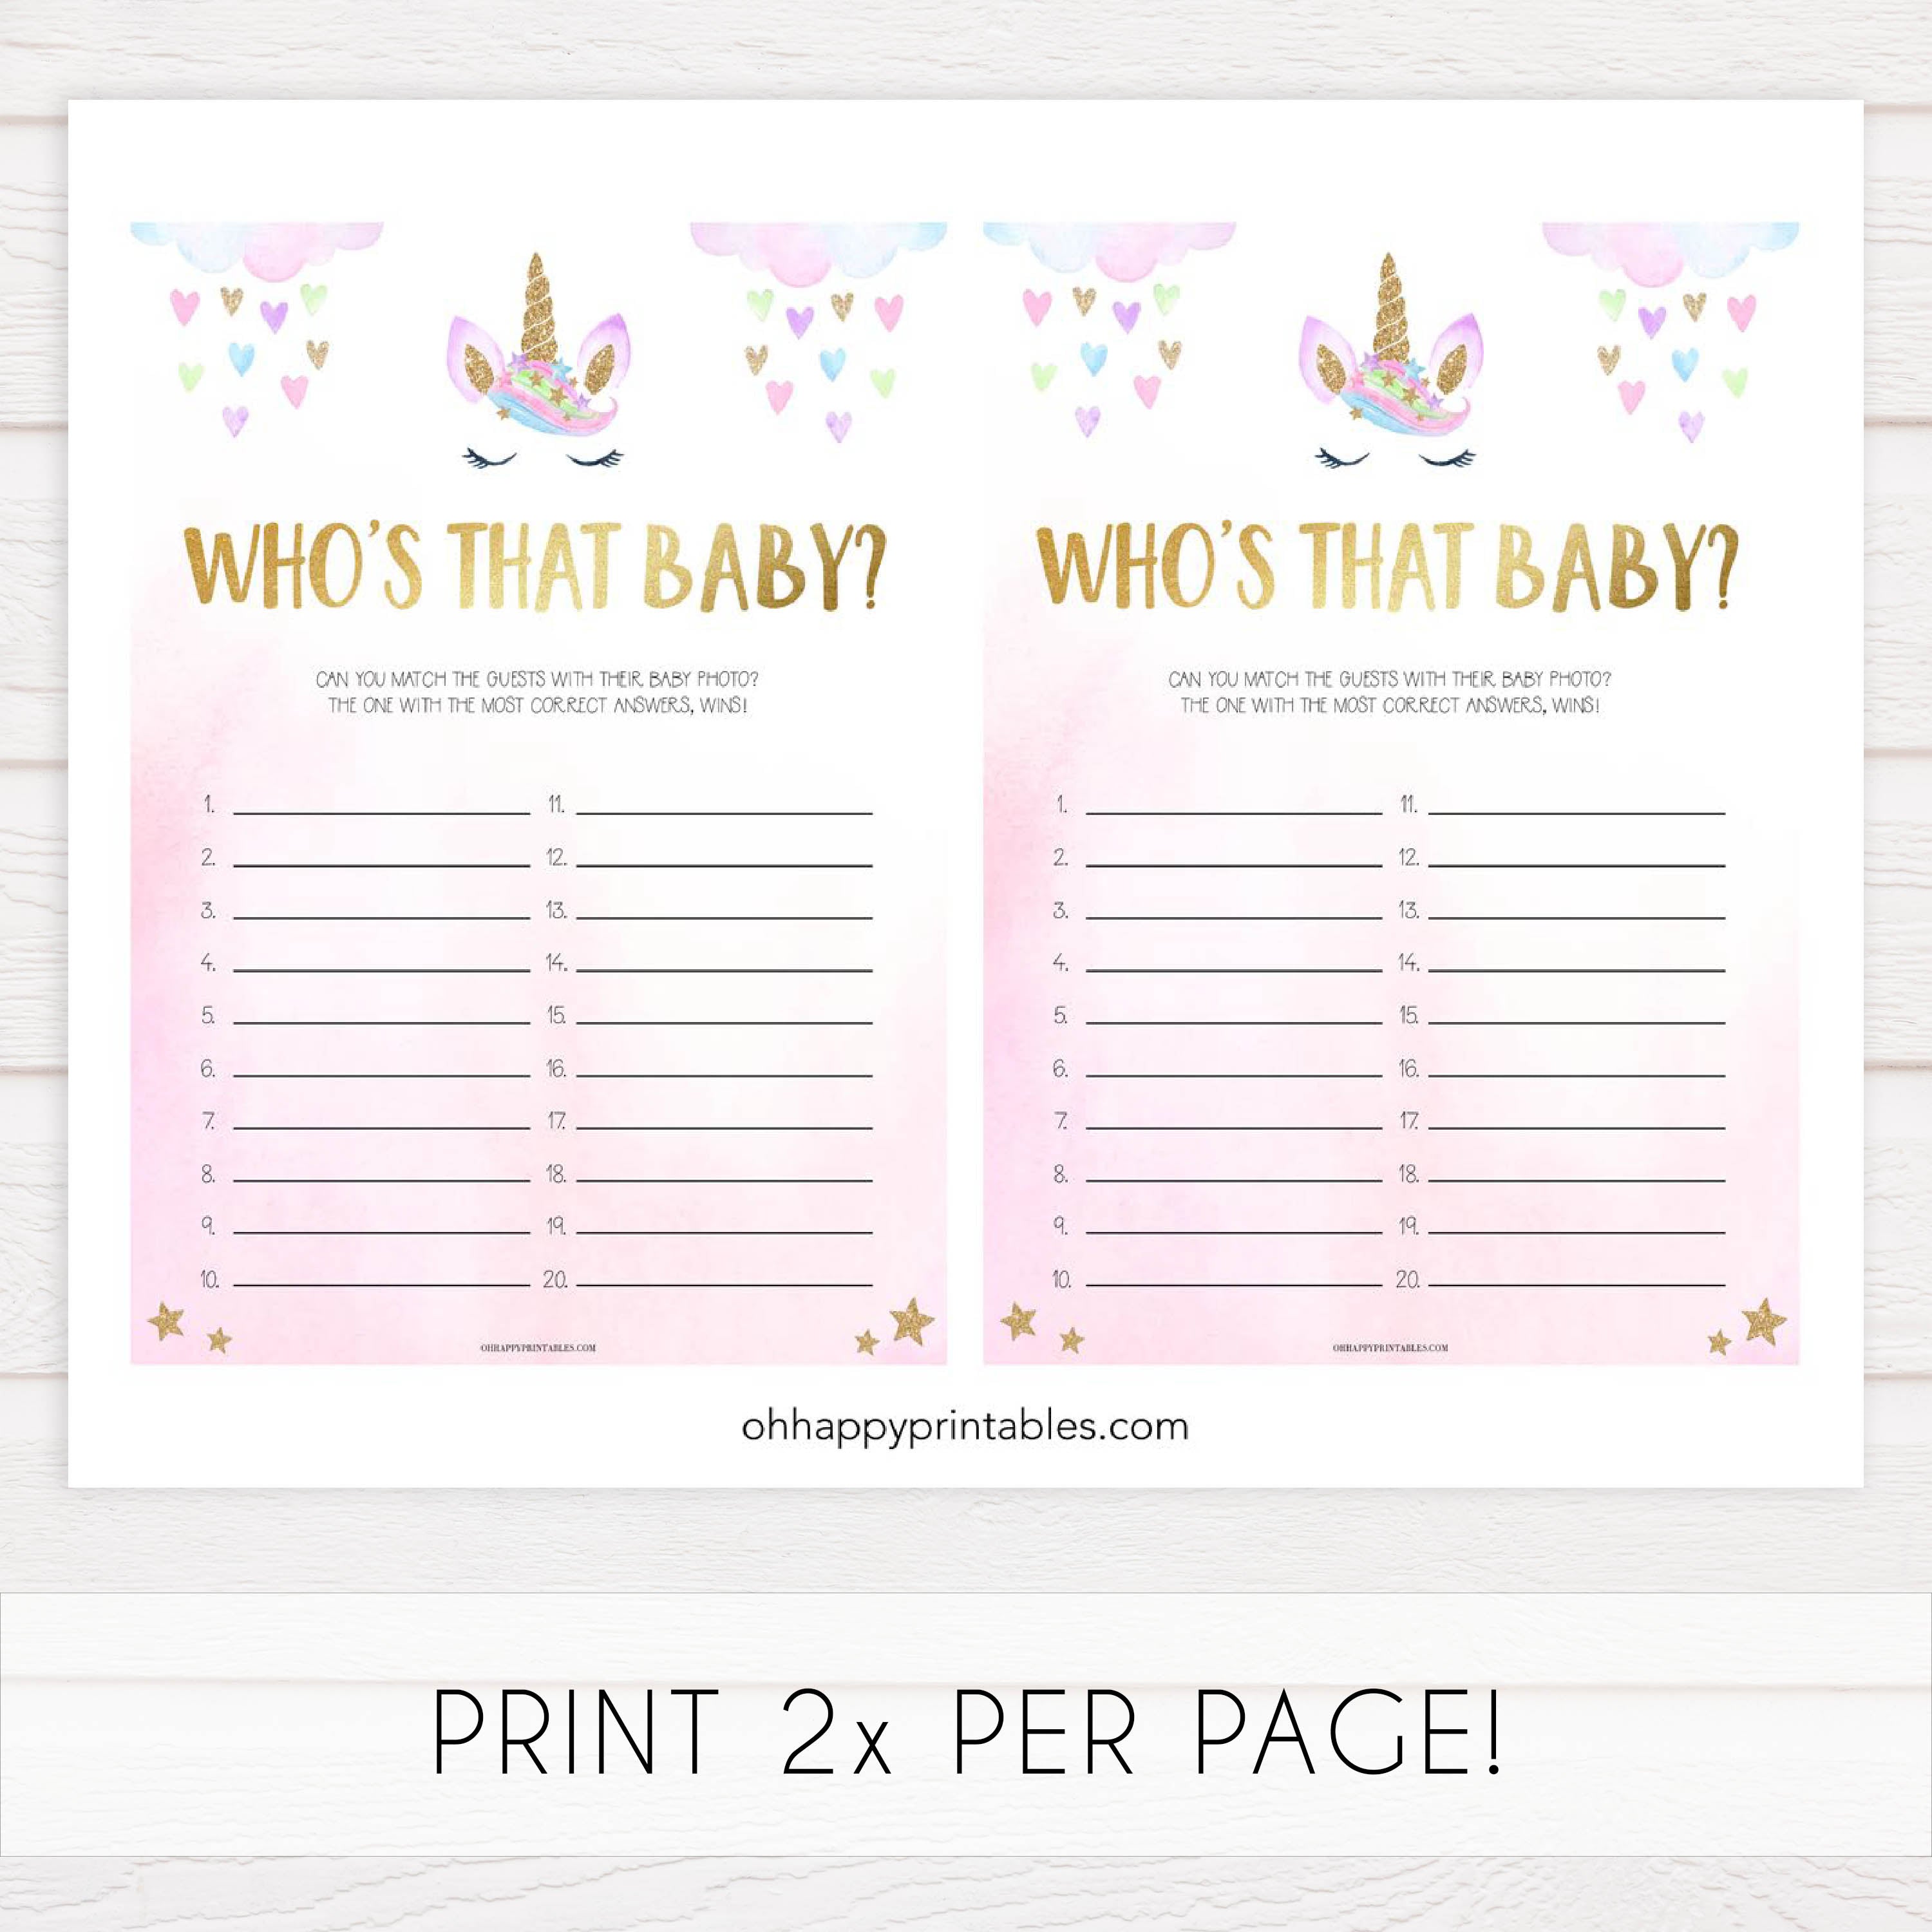 whos that baby game, whos that baby, Printable baby shower games, unicorn baby games, baby shower games, fun baby shower ideas, top baby shower ideas, unicorn baby shower, baby shower games, fun unicorn baby shower ideas